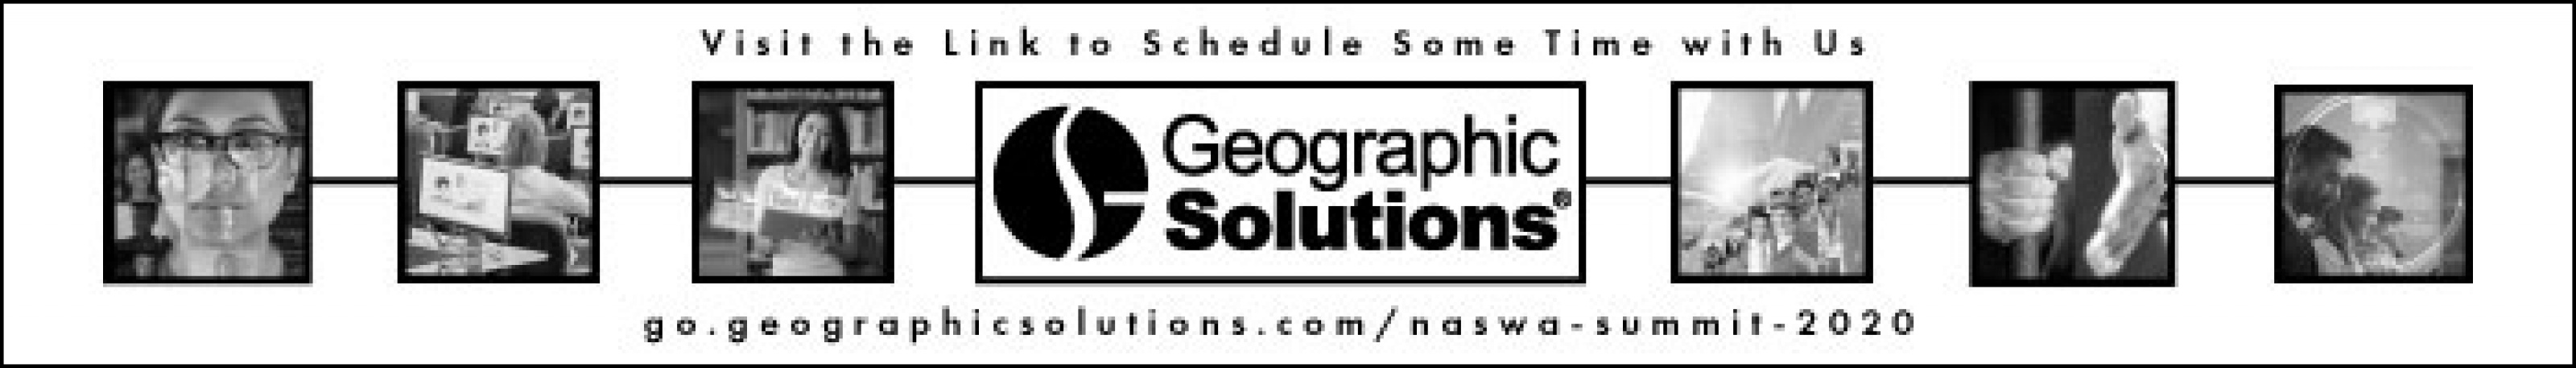 Geographic Solutions Sponsor Ad